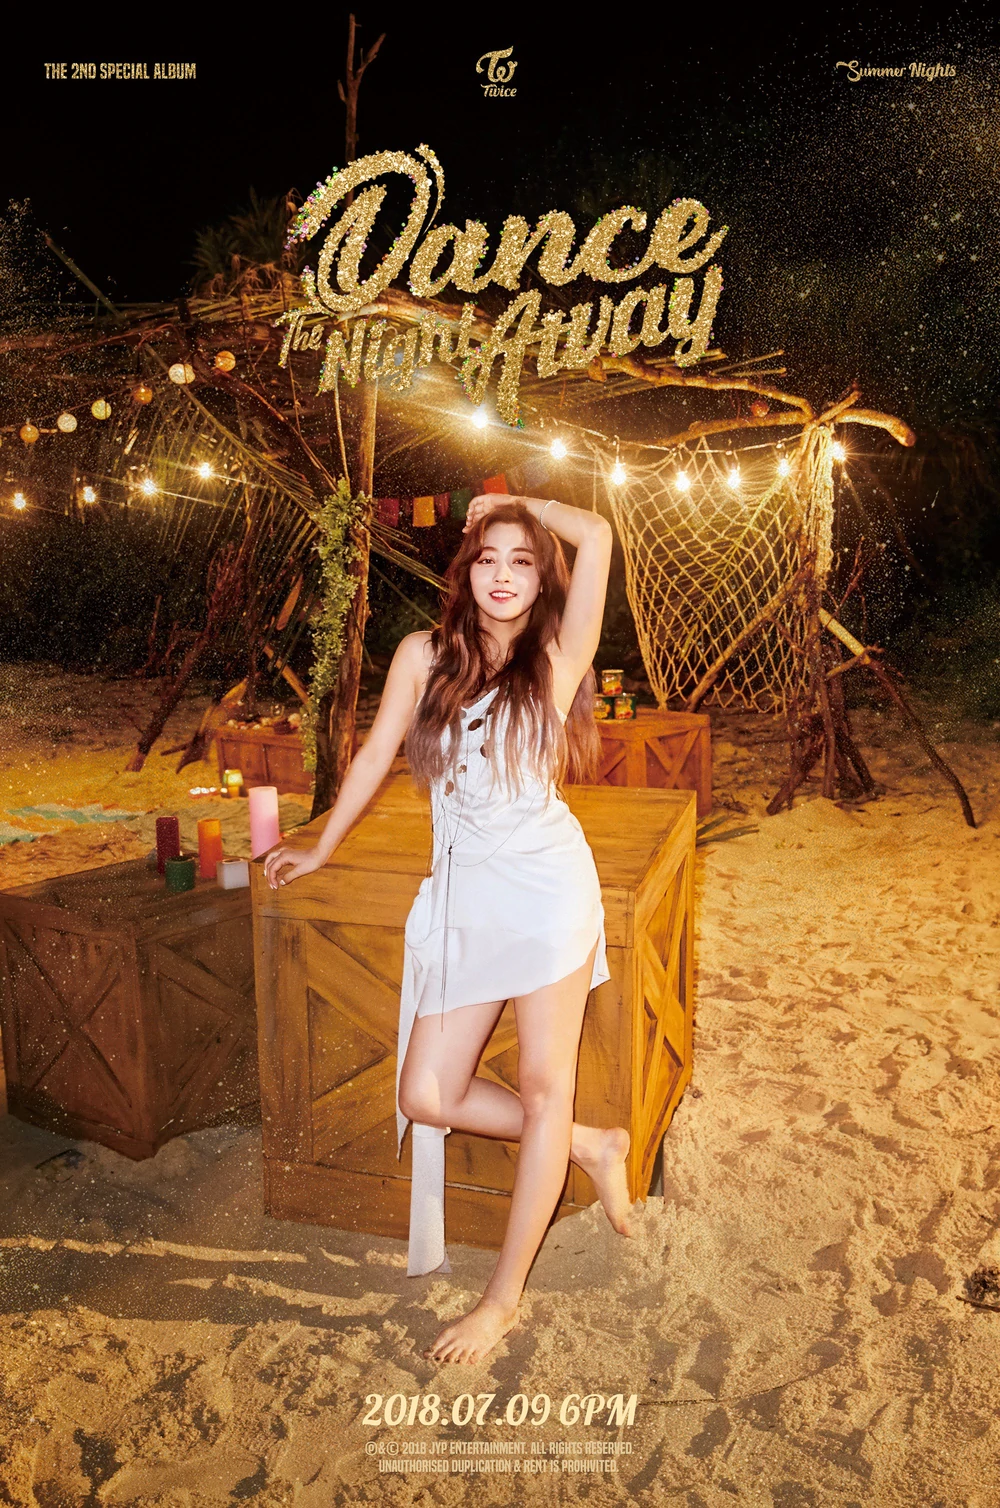 Twice Summer Nights Jihyo Concept Teaser Picture Image Photo Kpop K-Concept 2